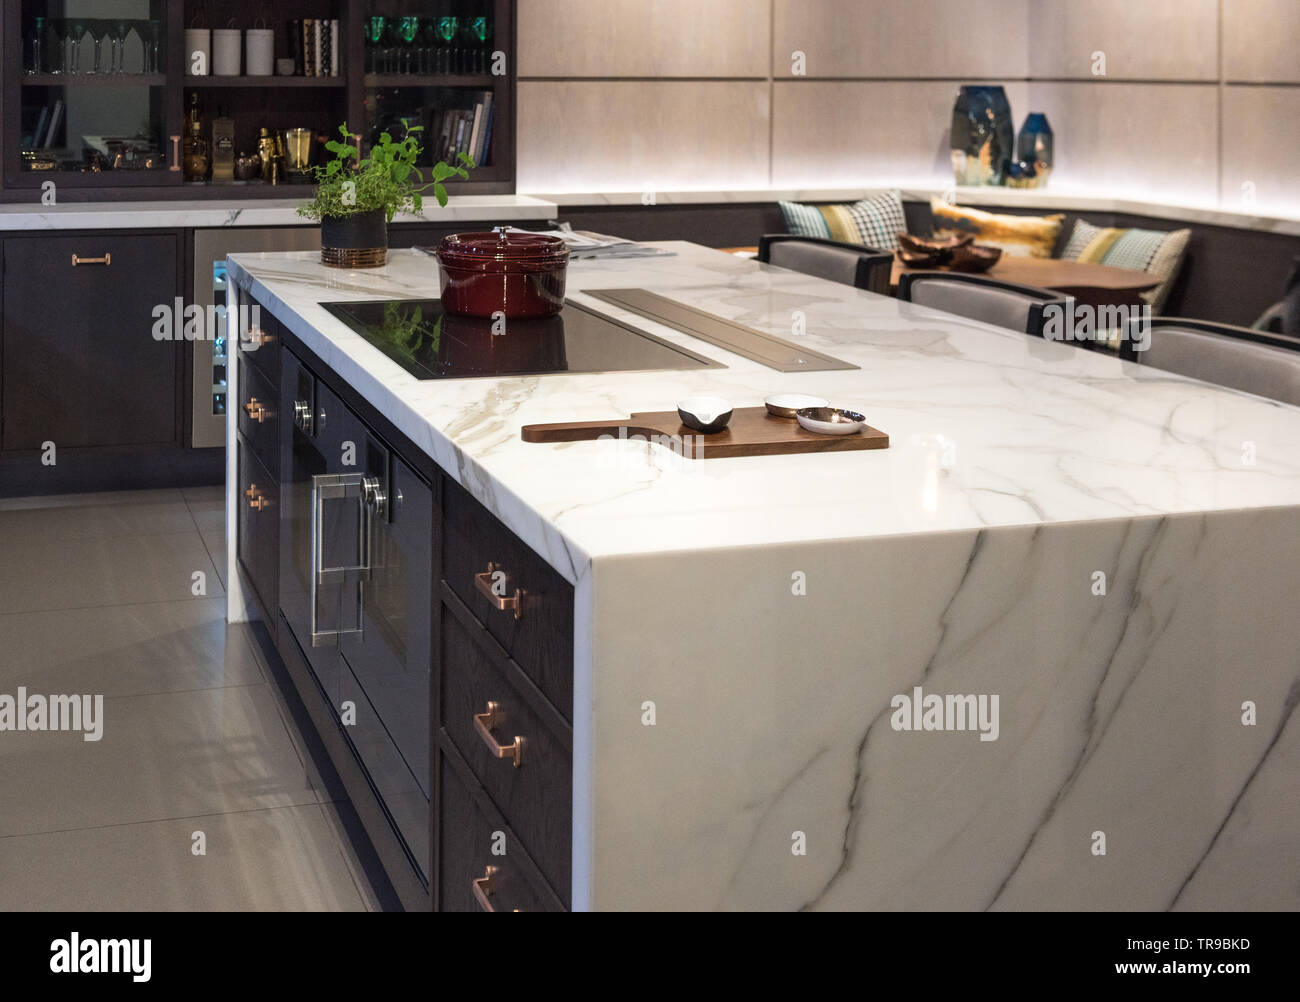 https://c8.alamy.com/comp/TR9BKD/marble-top-kitchen-island-with-ceramic-bowls-on-wooden-board-TR9BKD.jpg